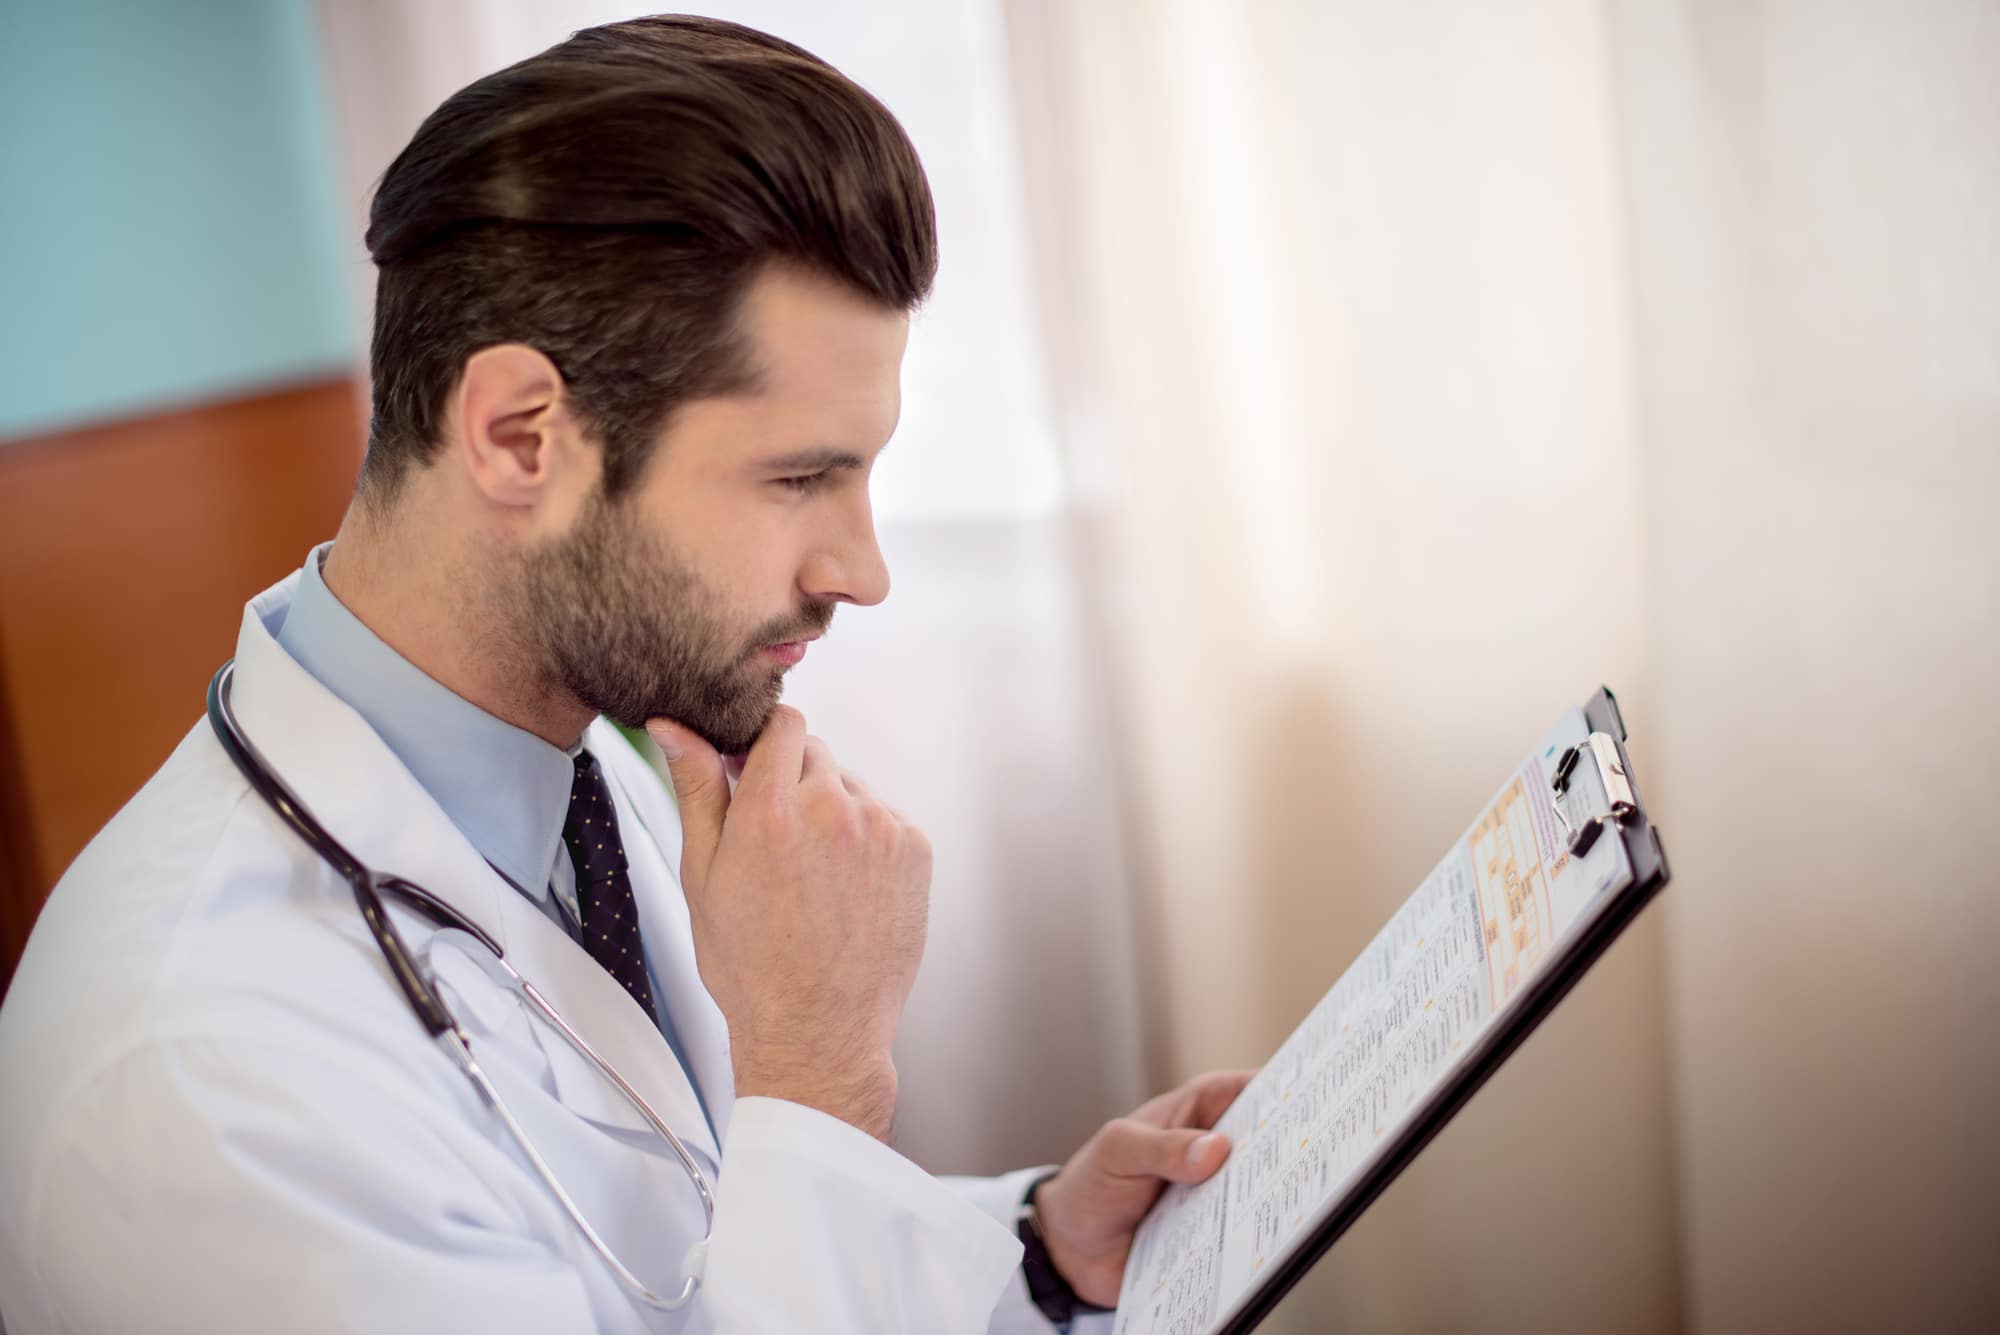 doctor looking intently at medical chart on clipboard